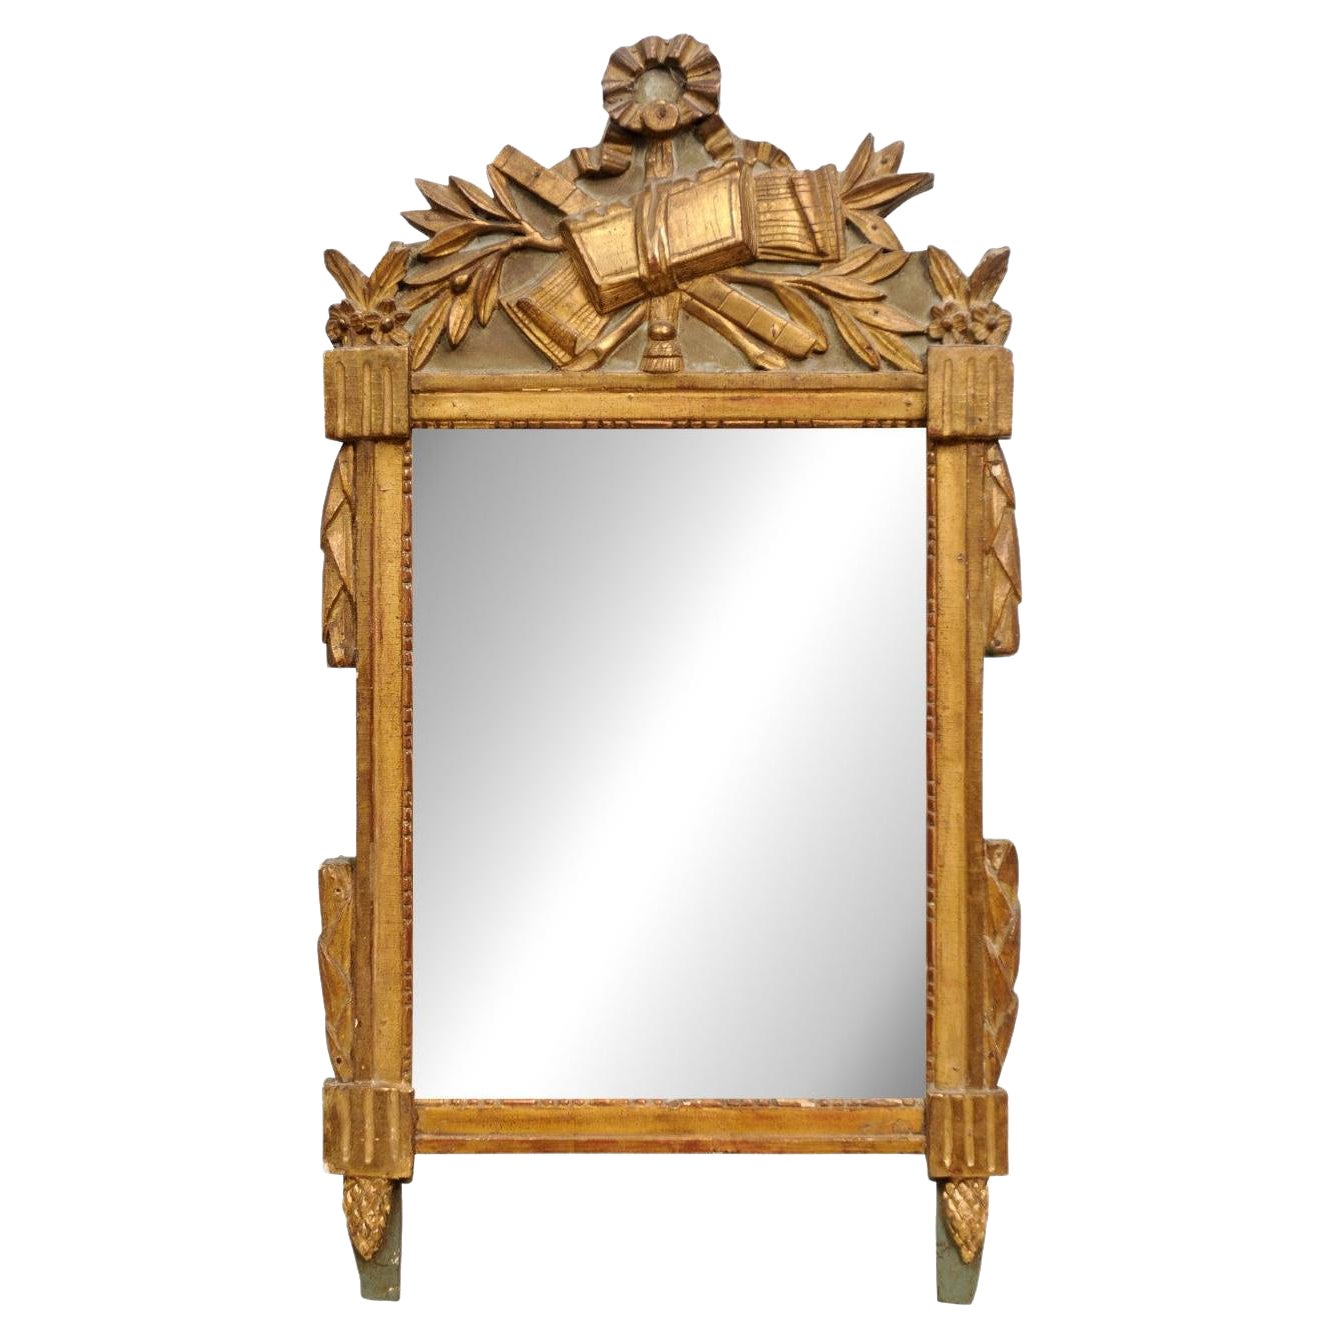 French 18th Century Louis XVI Period Giltwood Mirror with Carved Crest For Sale